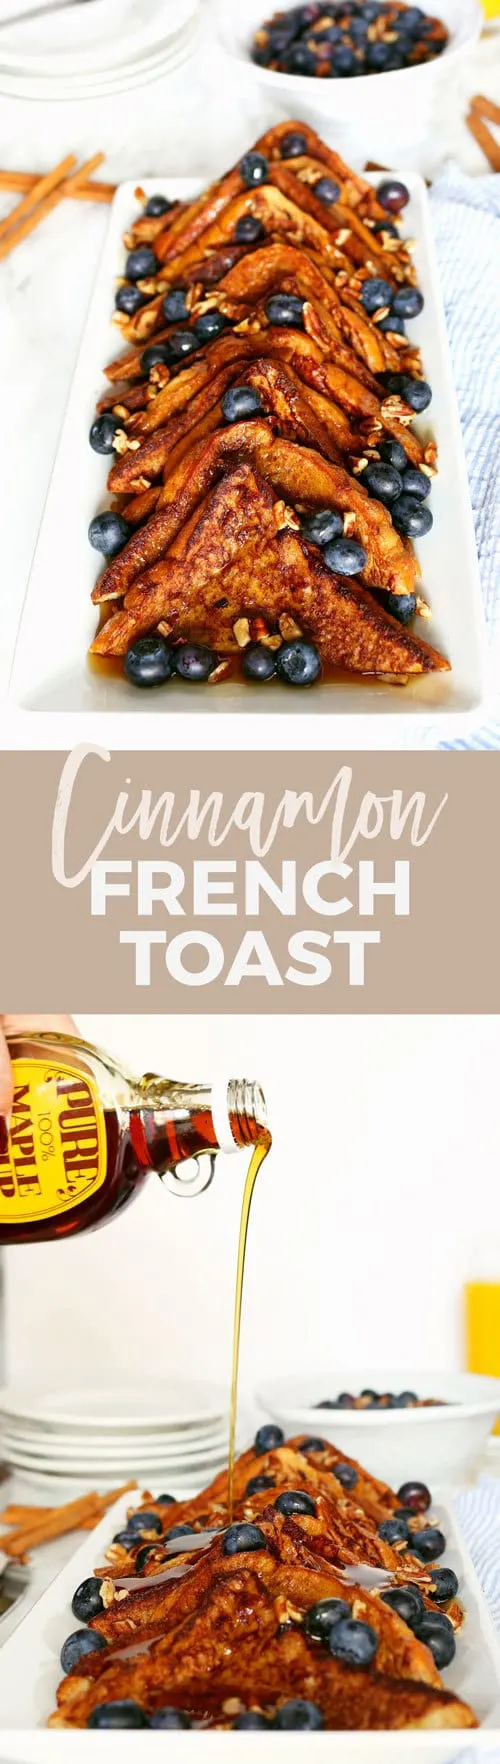 This cinnamon french toast is a great addition to your next brunch with simple ingredients. Top with fresh blueberries, pecans and maple syrup.